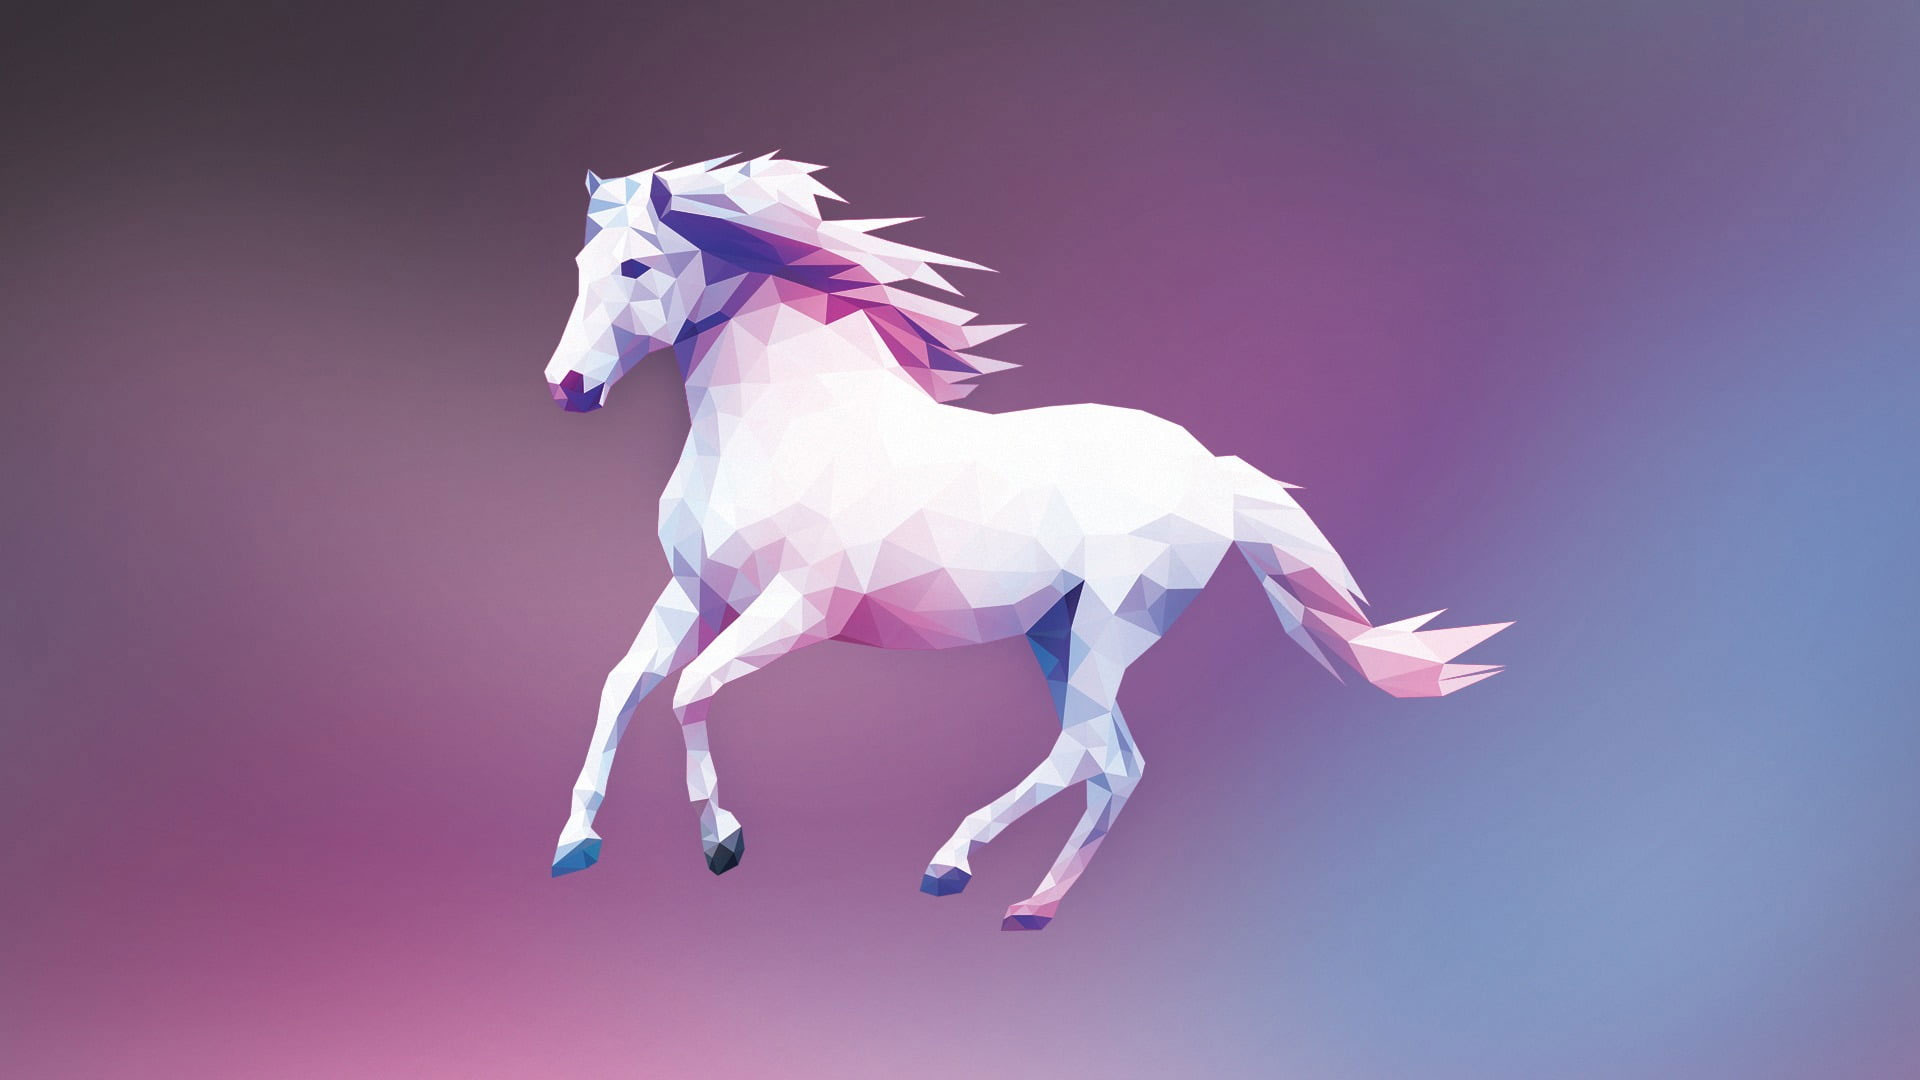 Polygon wallpaper, white, pink, and purple horse illustration, low poly, digital art